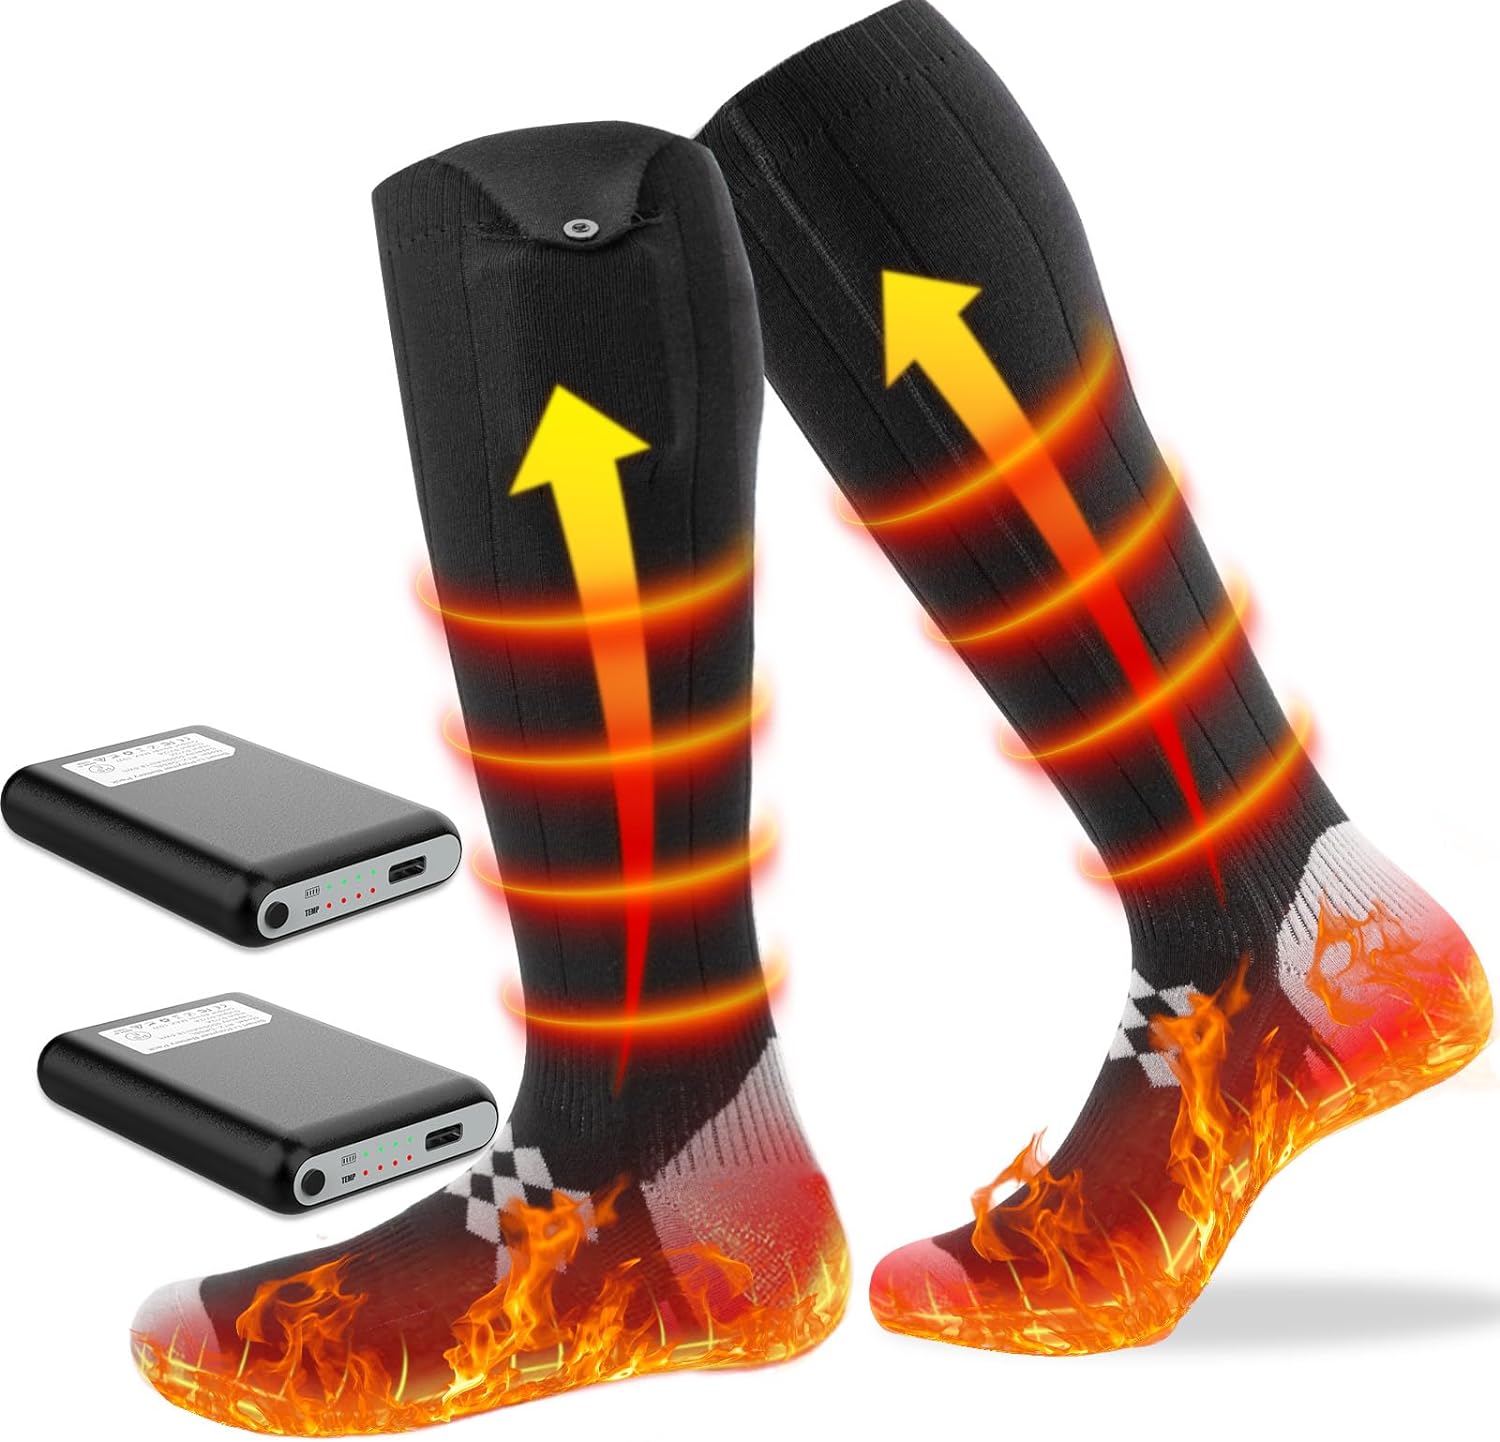 Go! Upgraded Heated Socks for Men Rechargeable, Act Fast! Electric Socks with 7500mAh Battery - 4 Temperature Settings, Keep Your Feet Warm While Doing Outdoor Sports, Cycling, Skating, and Skiing - Winter Feet Warming Gift